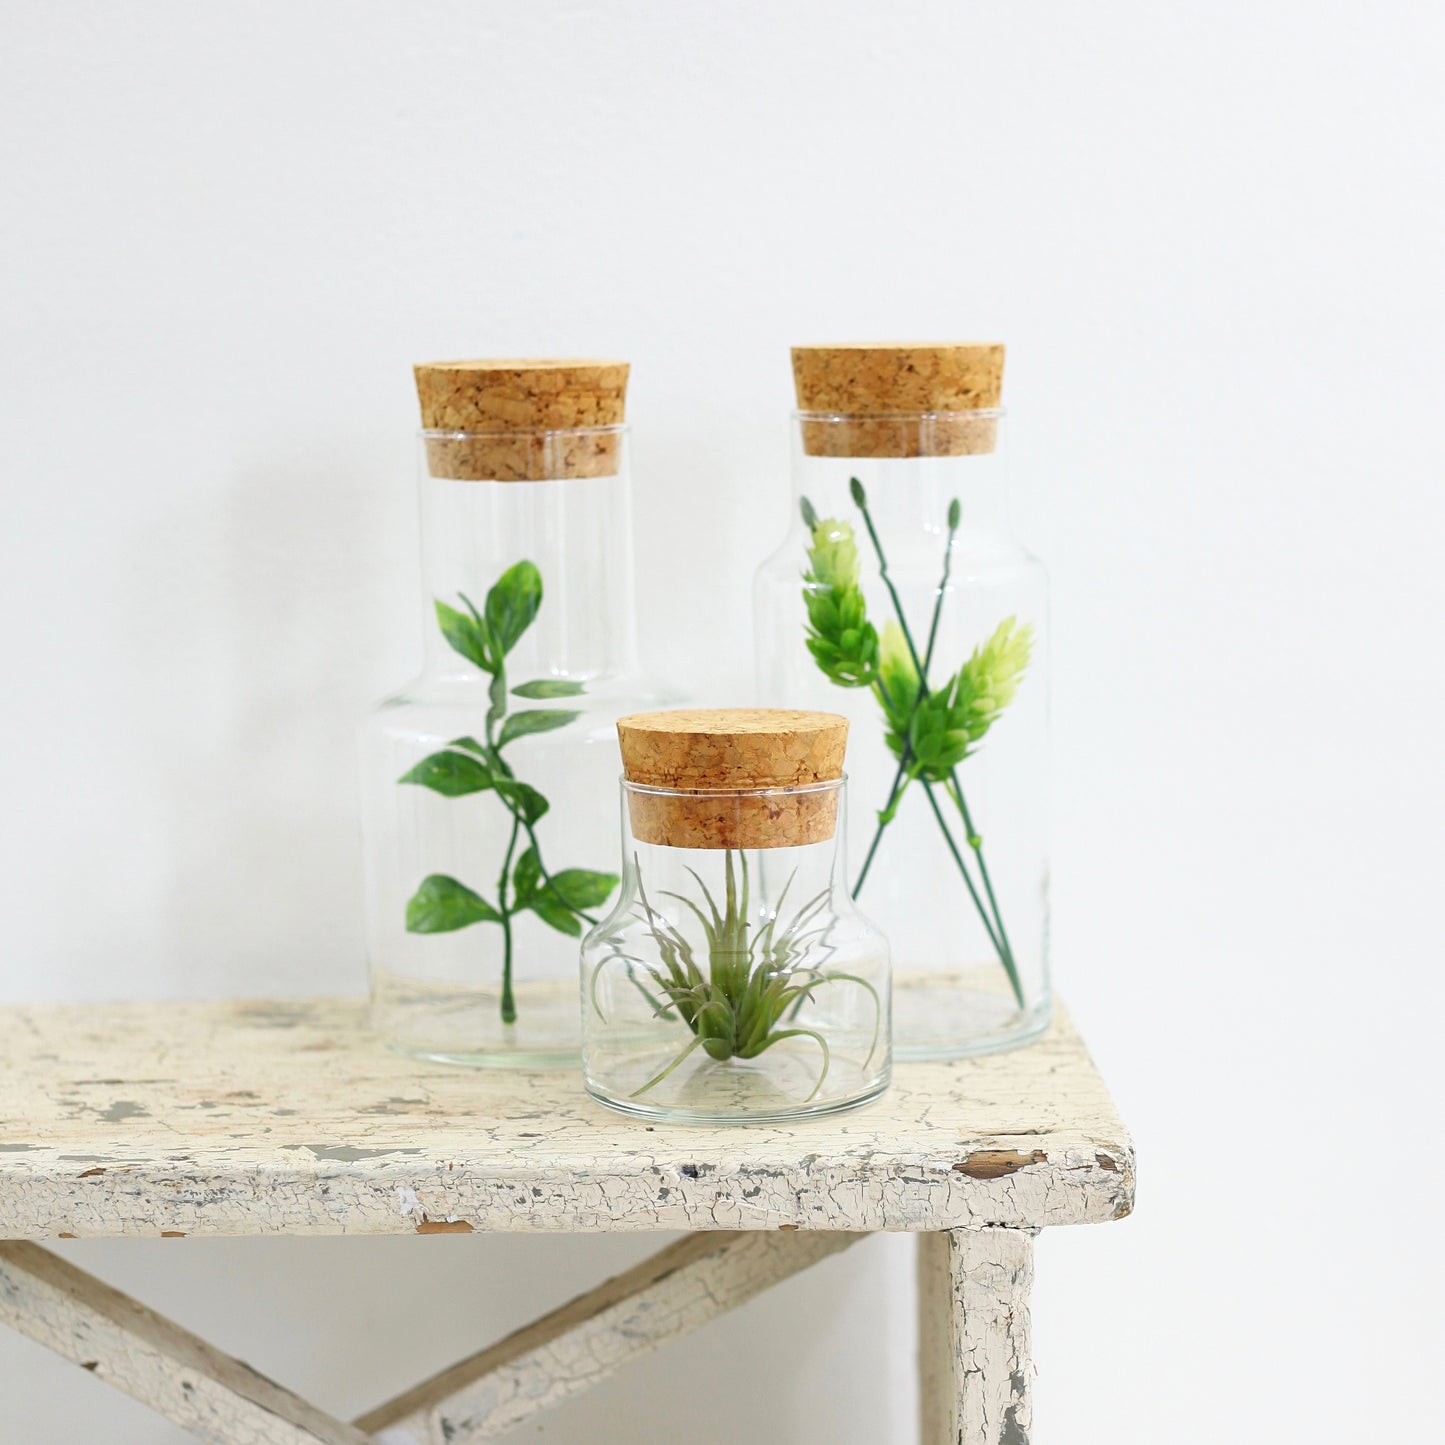 SOLD - Vintage Glass Apothecary Jars with Cork Lids